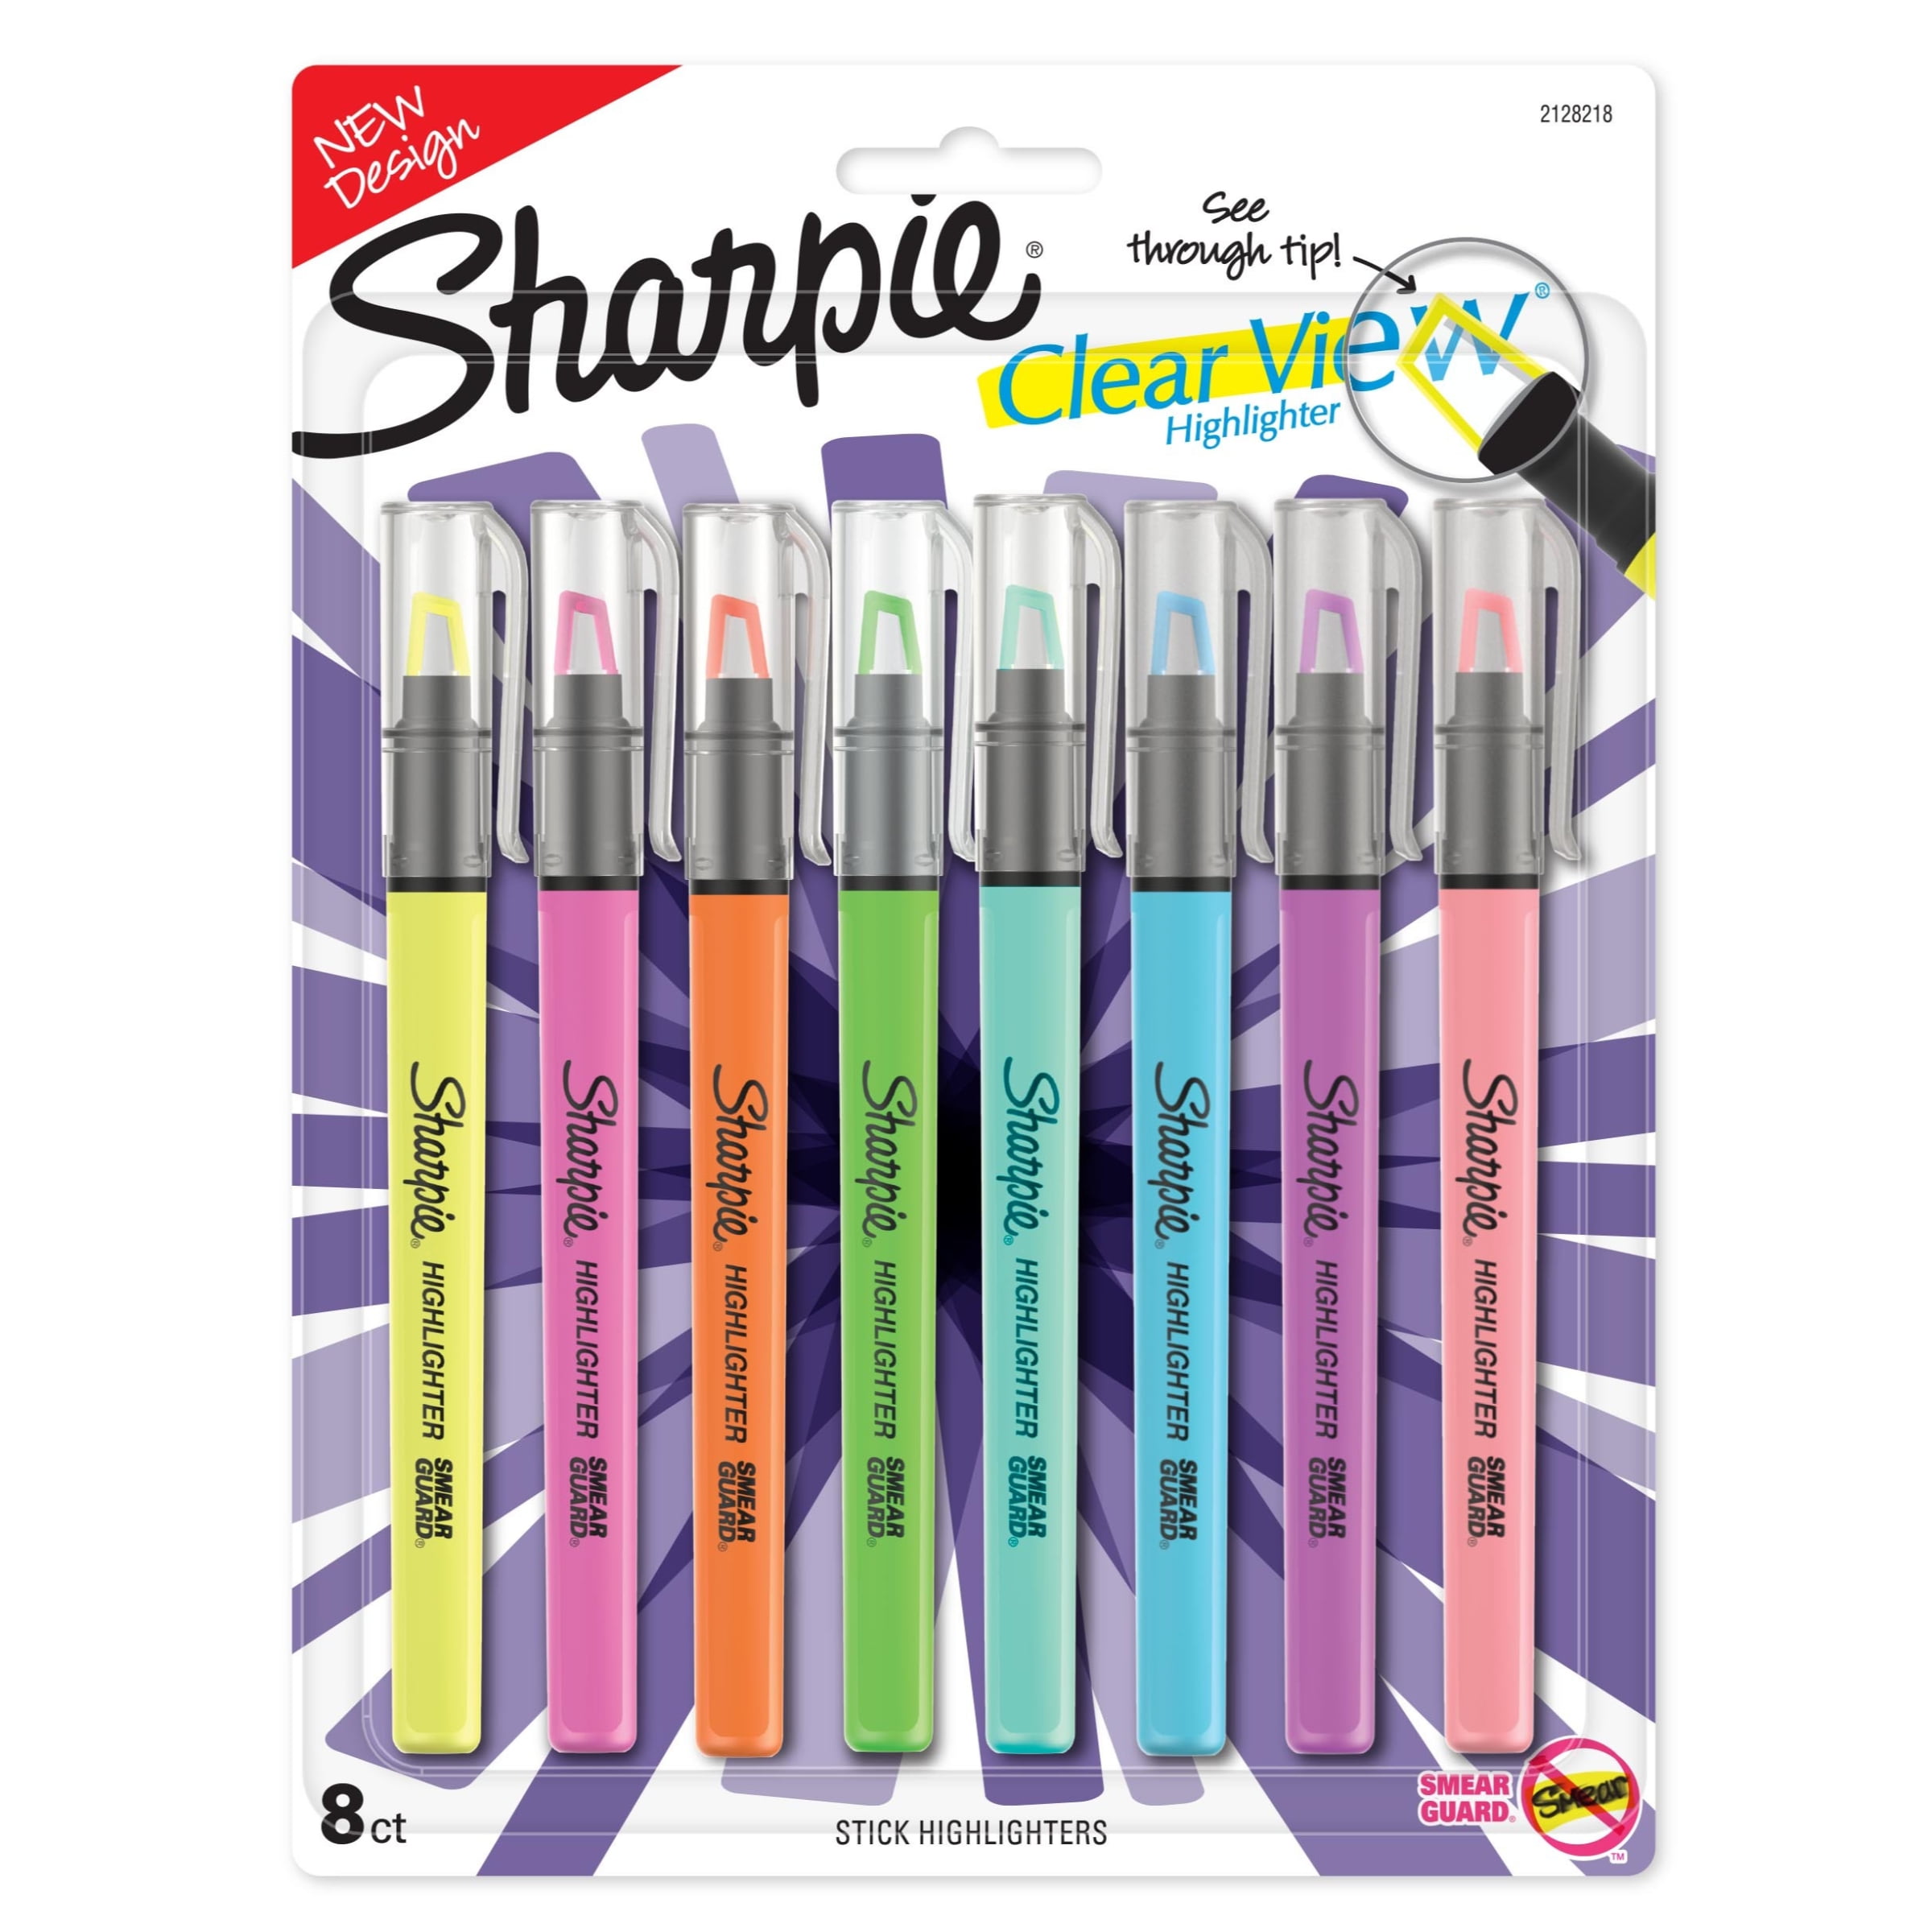 4 Sharpie Highlighters Assorted Colours Clear View Smear Guard See Through Tip 